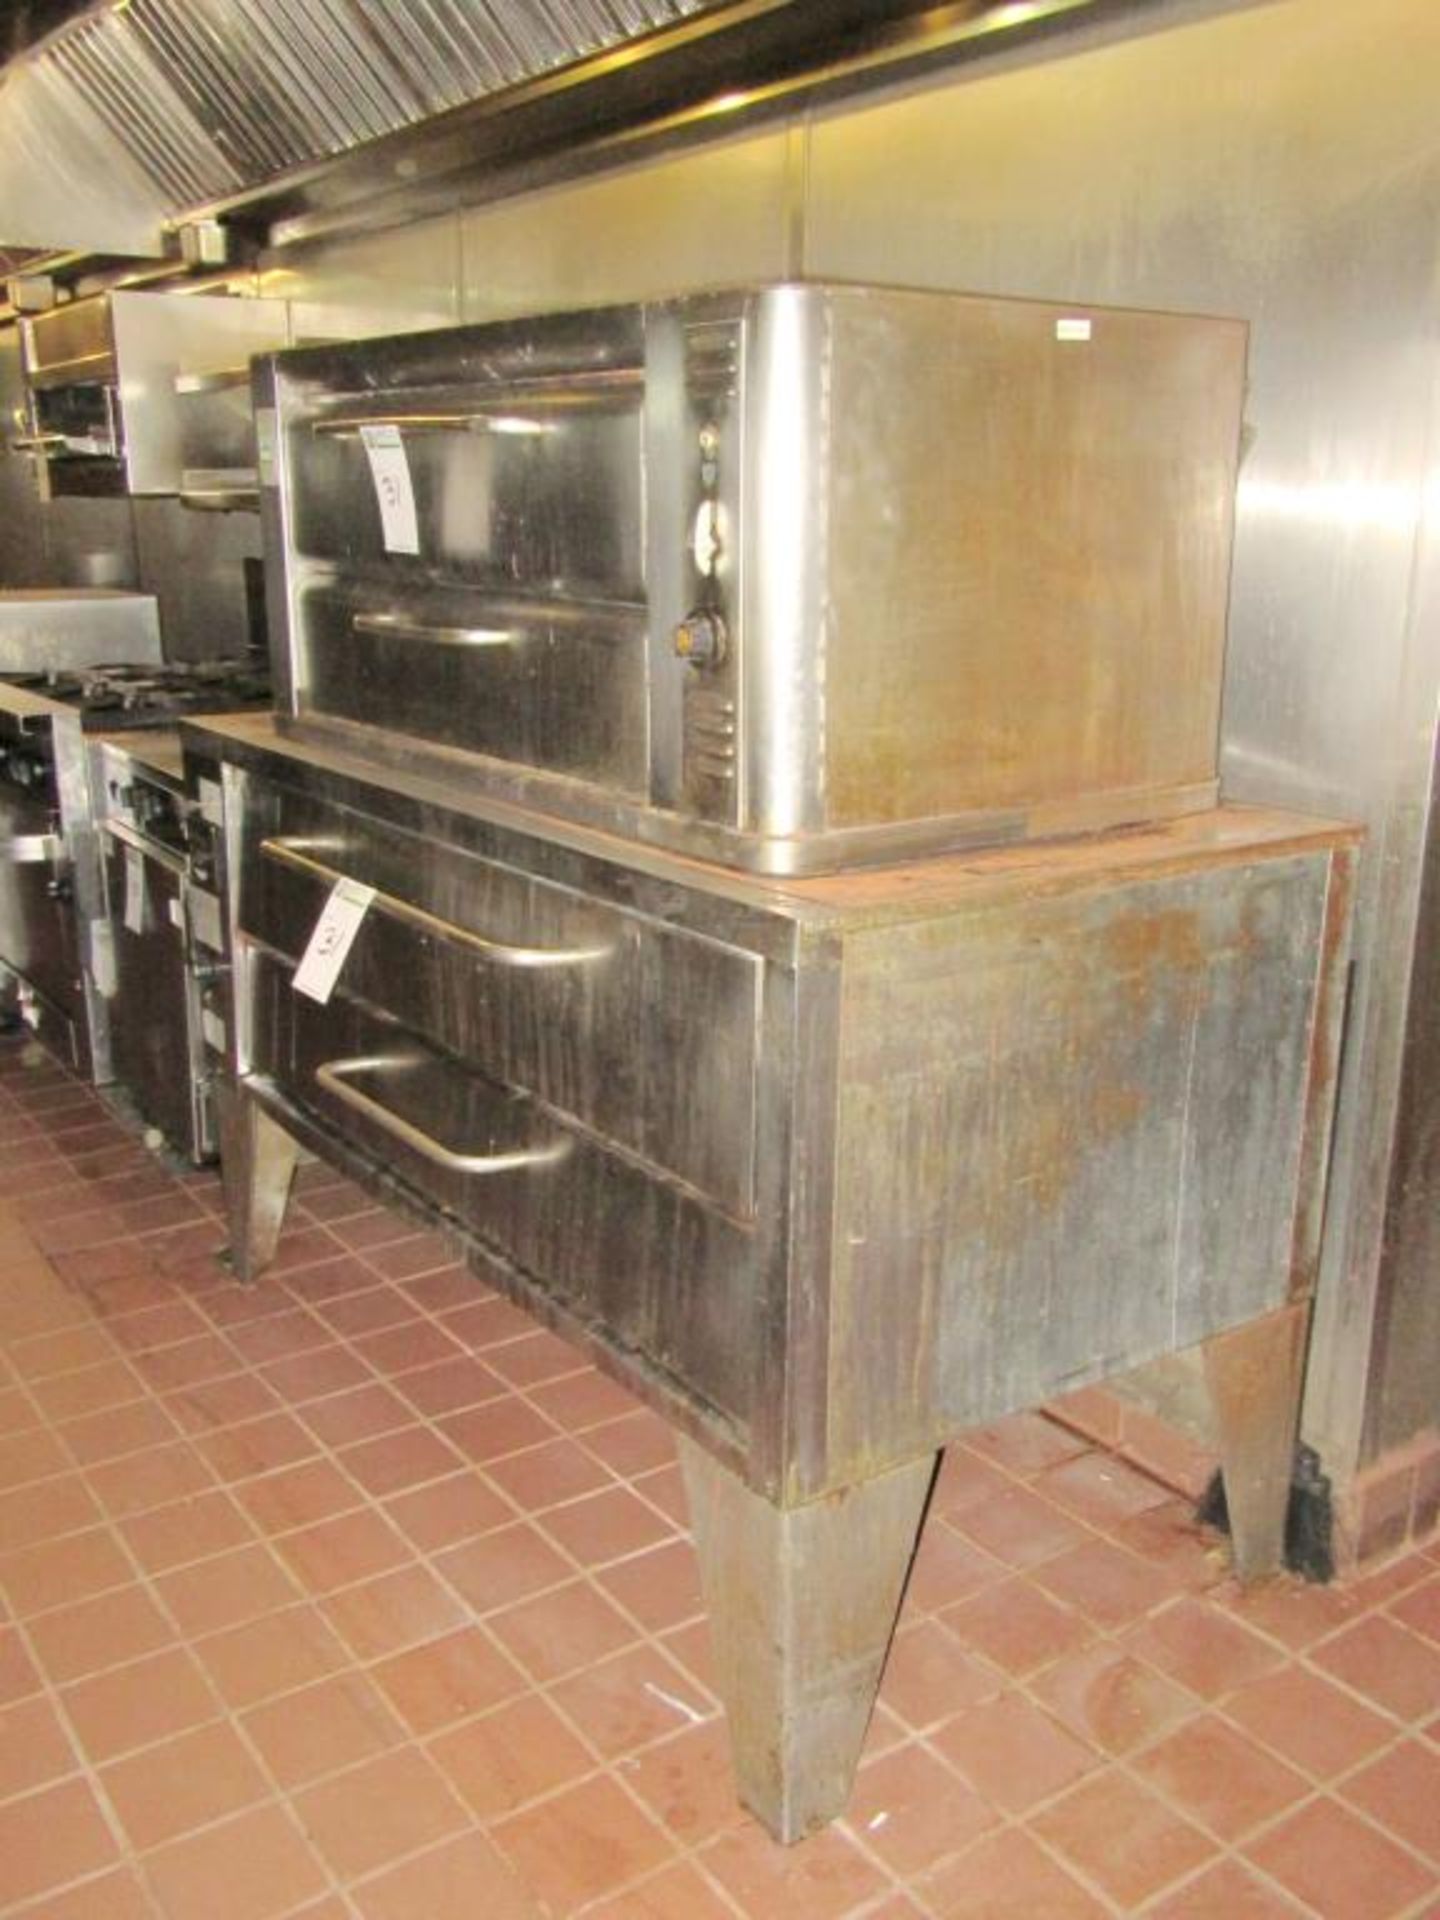 Gas Ovens - Image 7 of 7